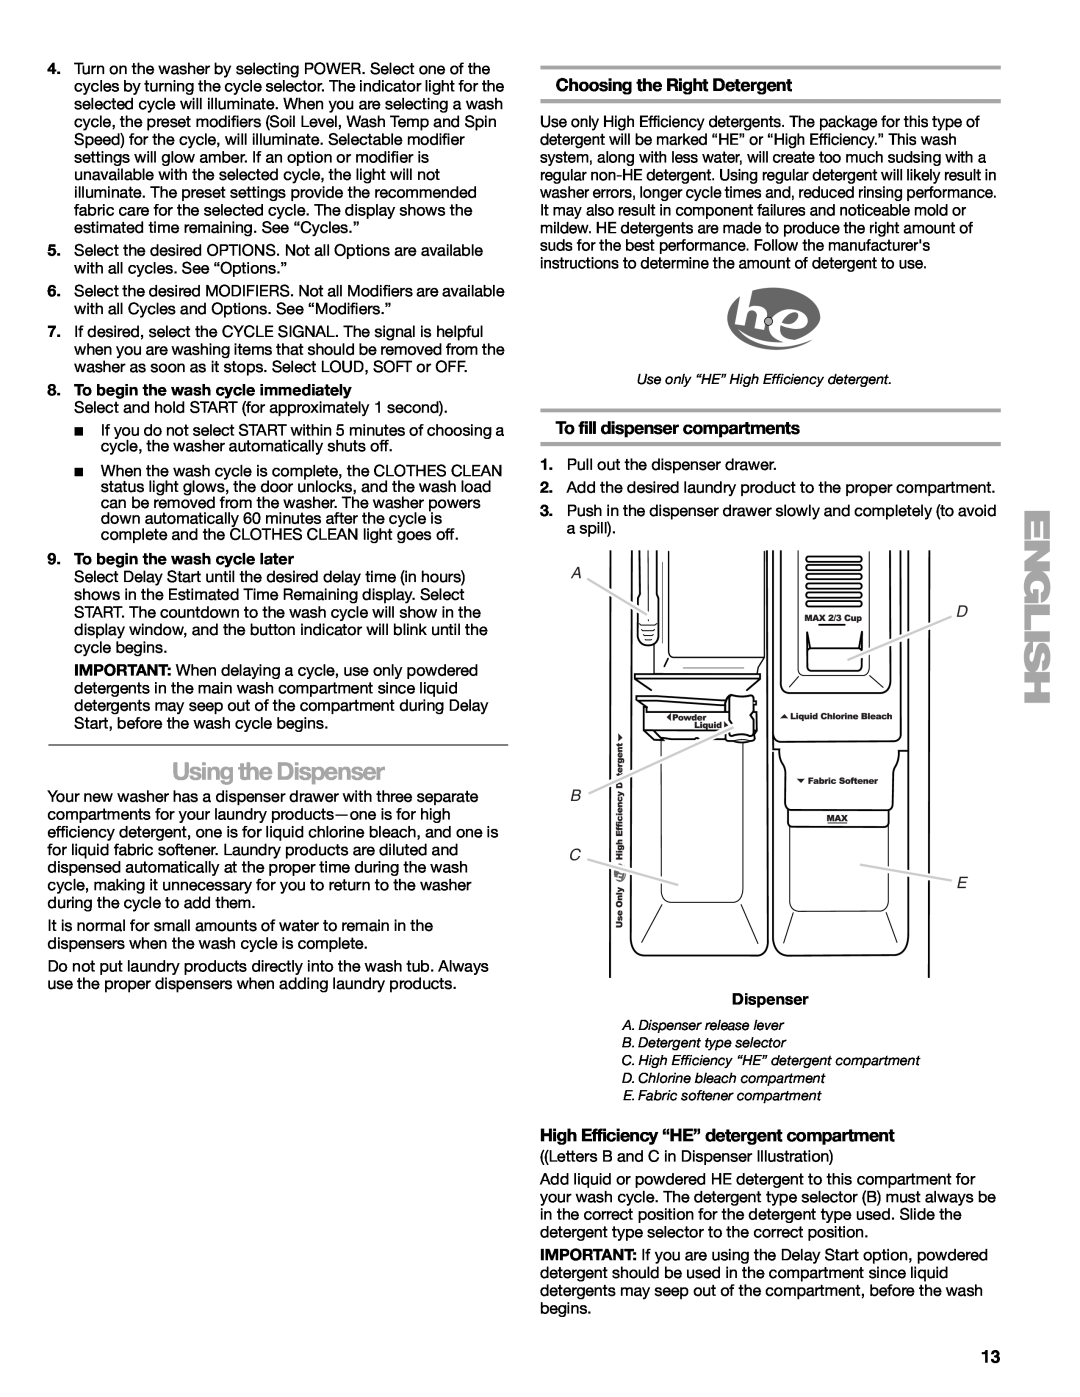 Kenmore W10133487A manual Using the Dispenser, Choosing the Right Detergent, To fill dispenser compartments, A D B C E 